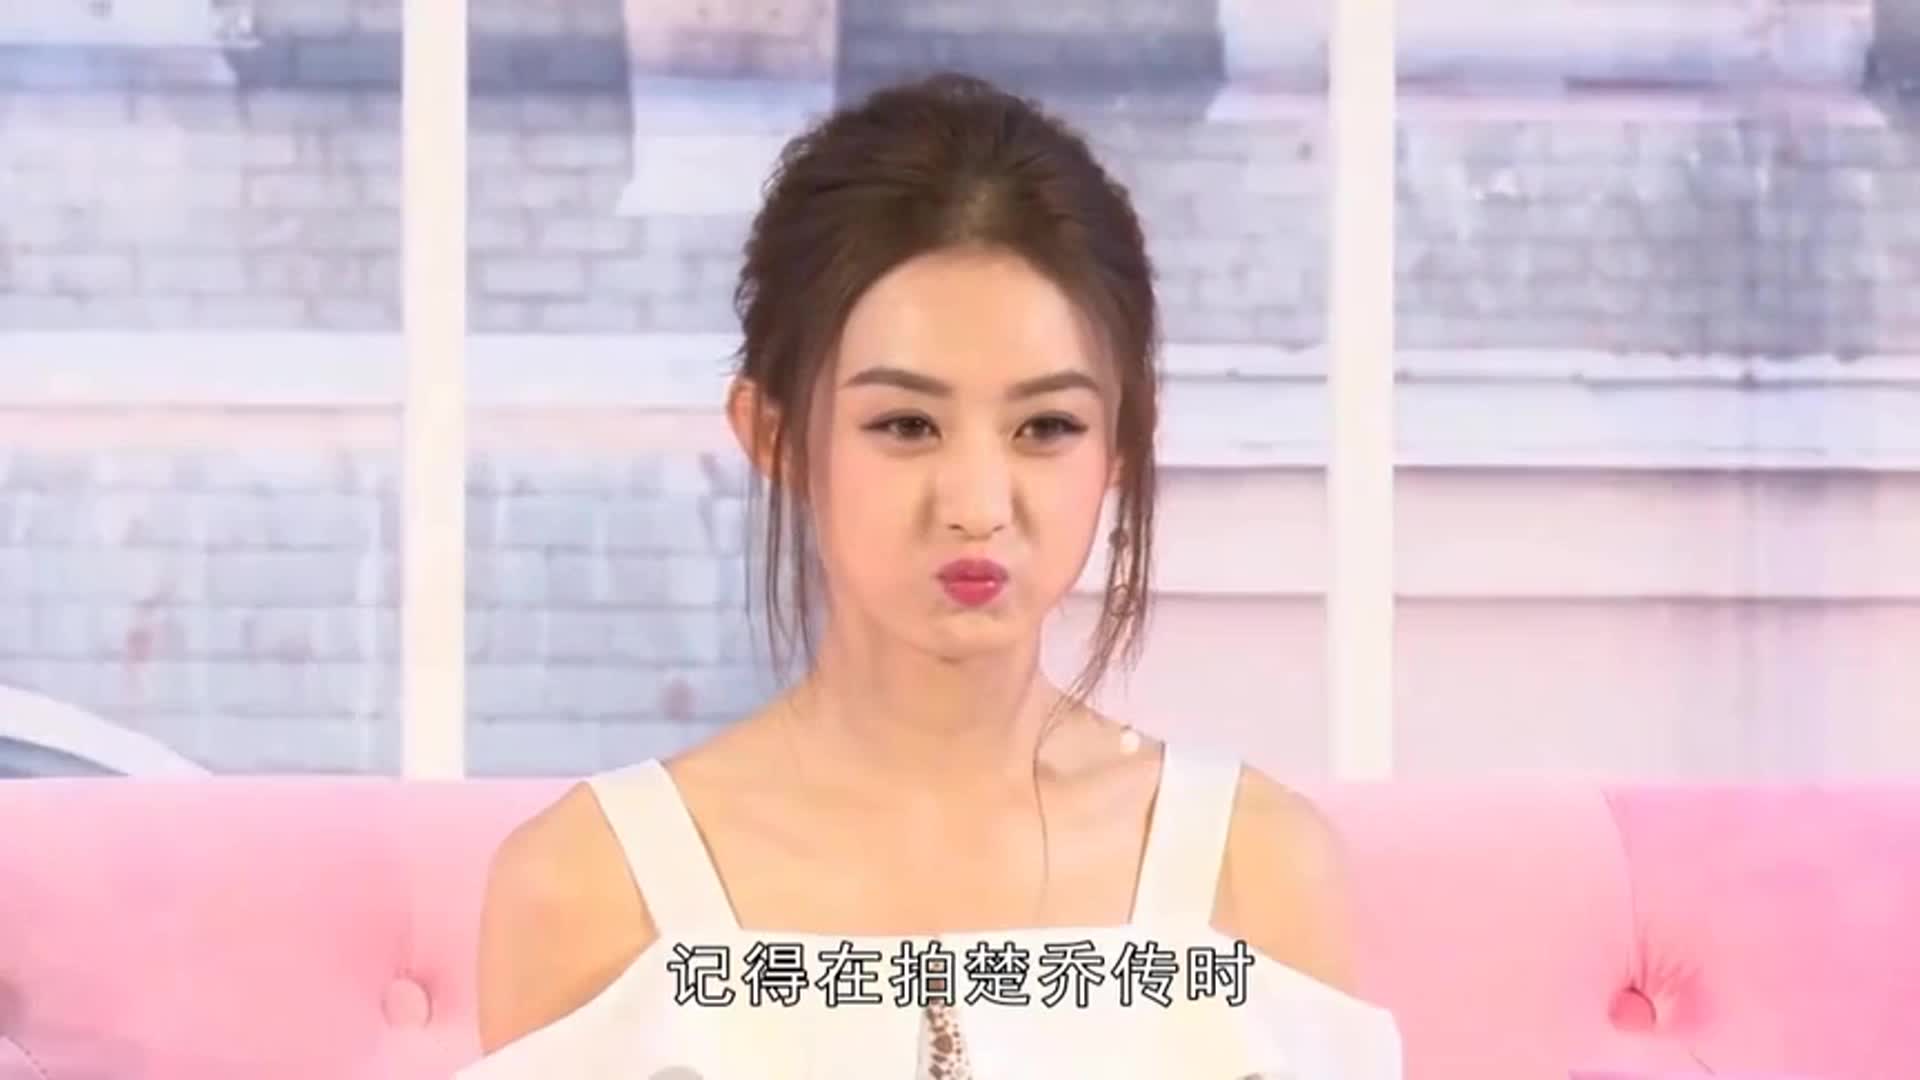 There is an awkward height called "Zhao Liying". Every time she suffers, she plays with the actress!